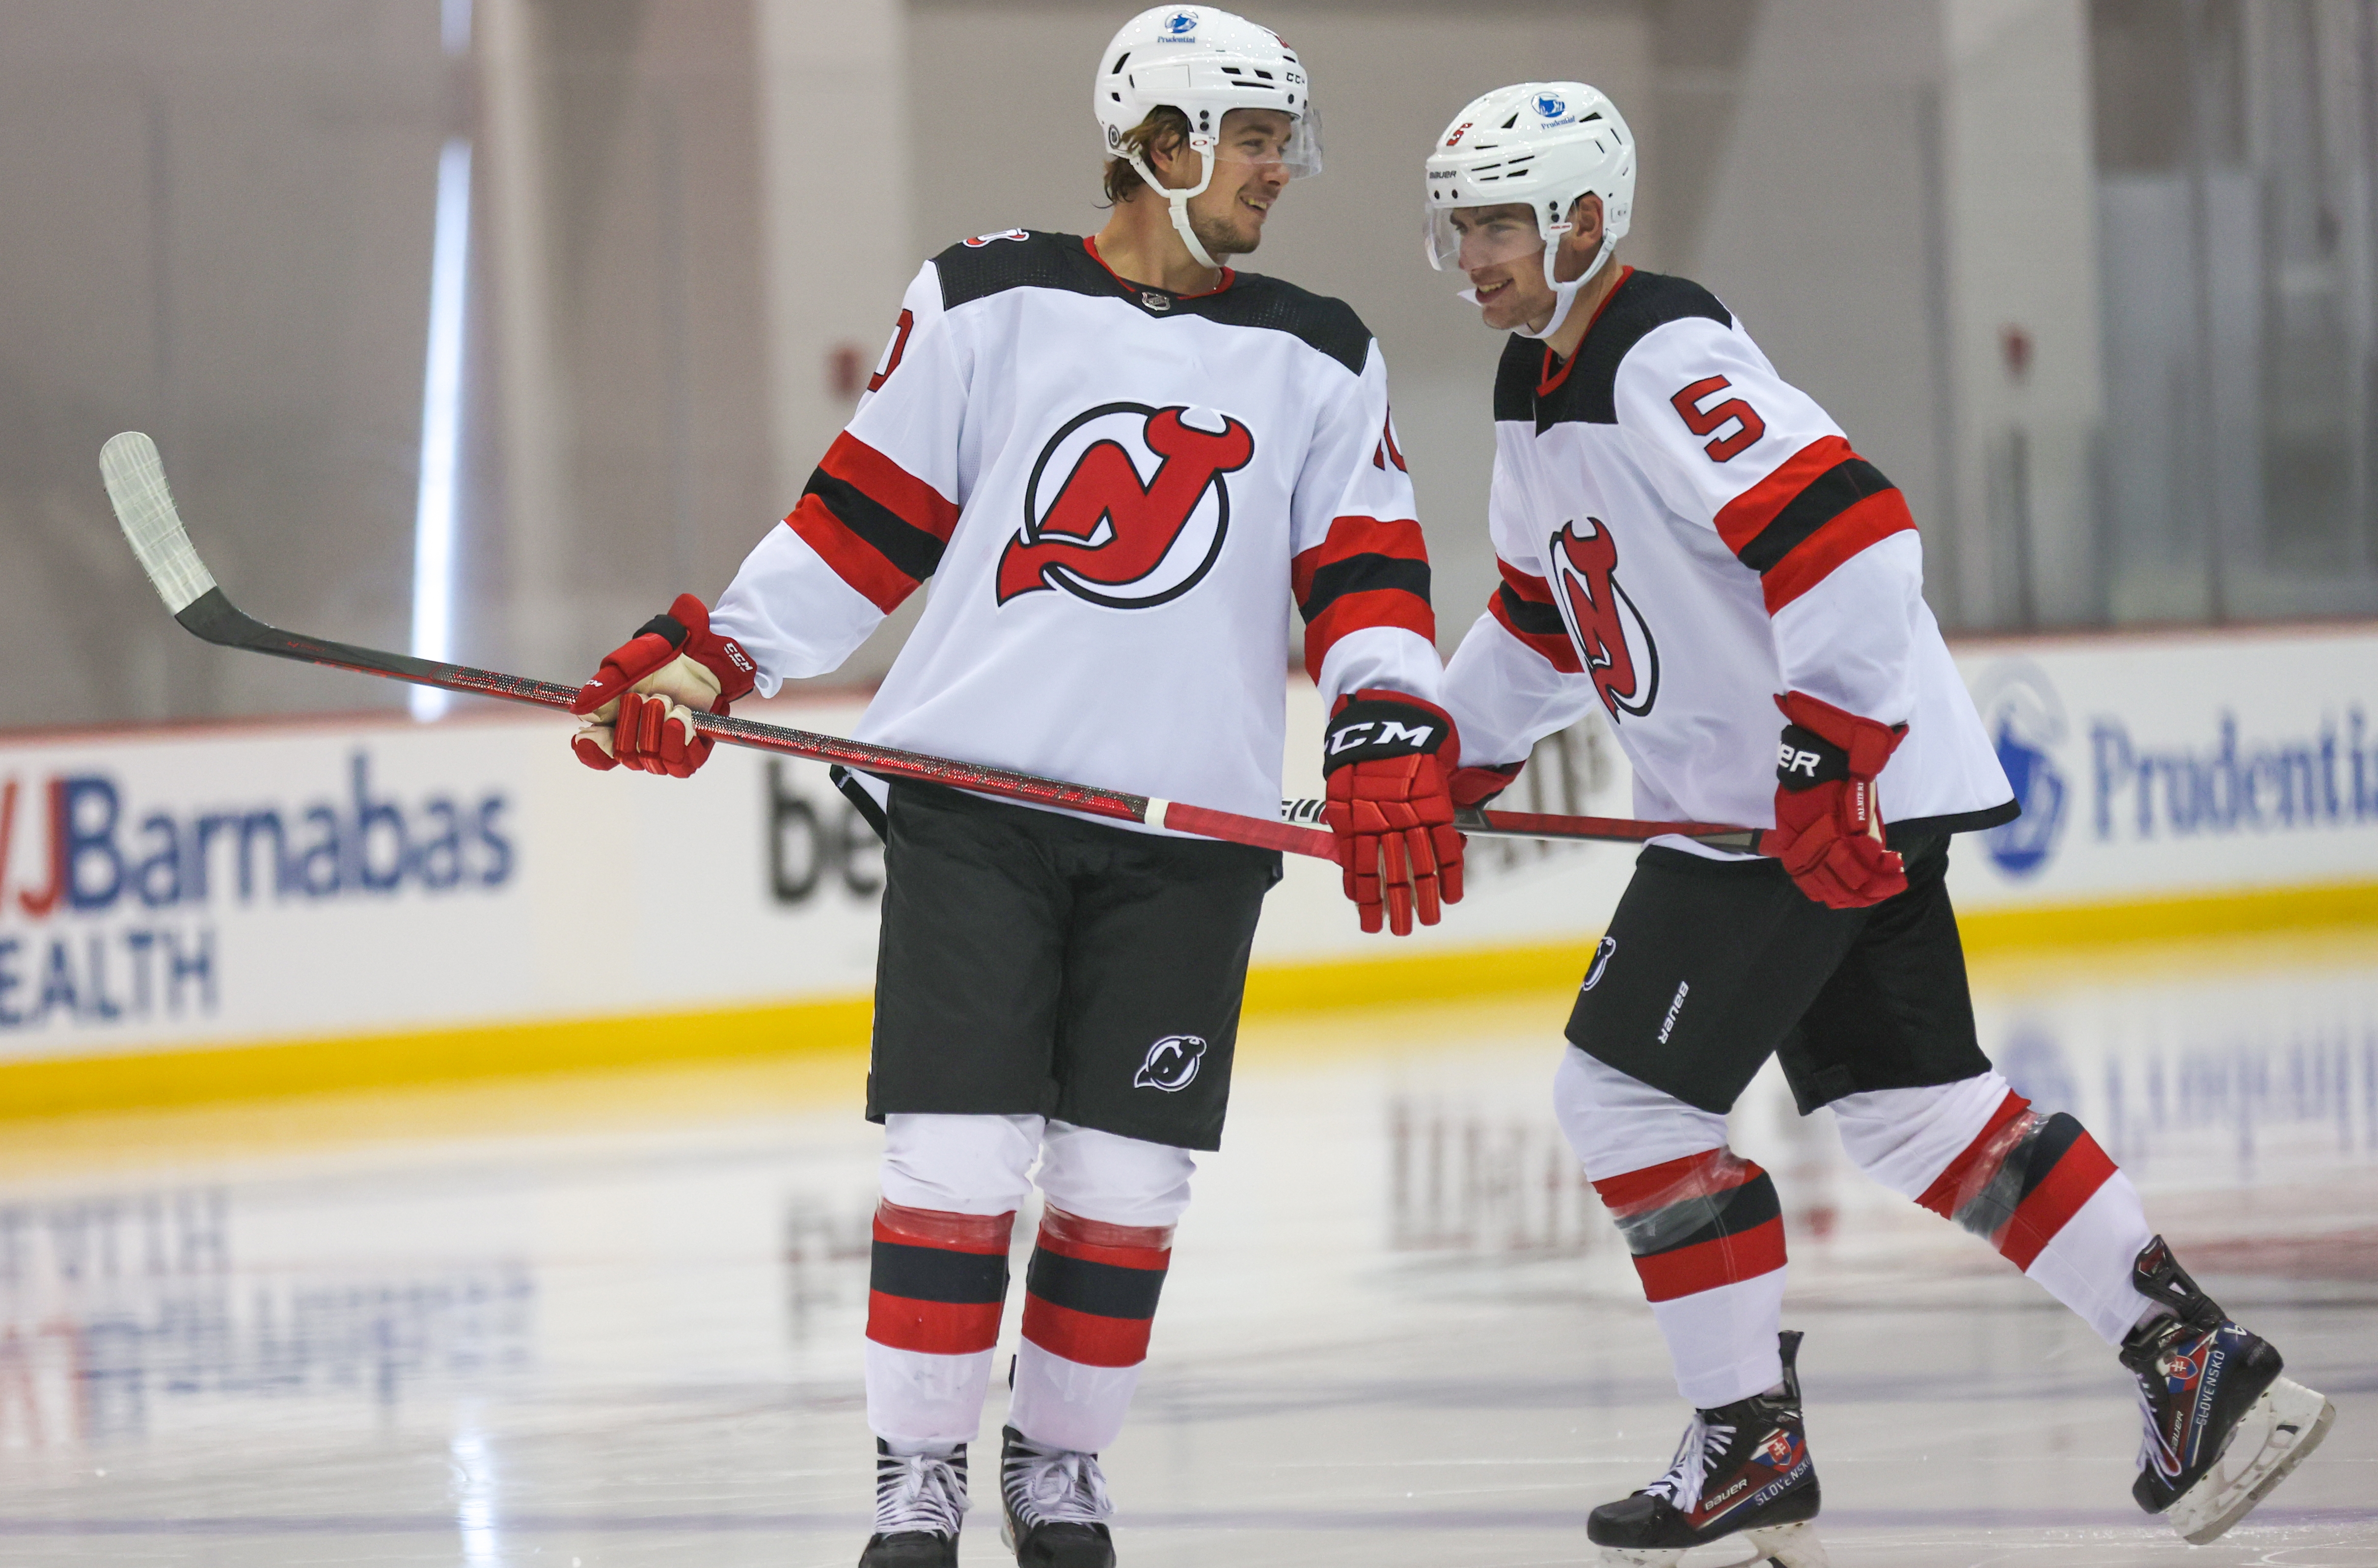 Devils Practice, Scrimmage on Day 2 of Camp